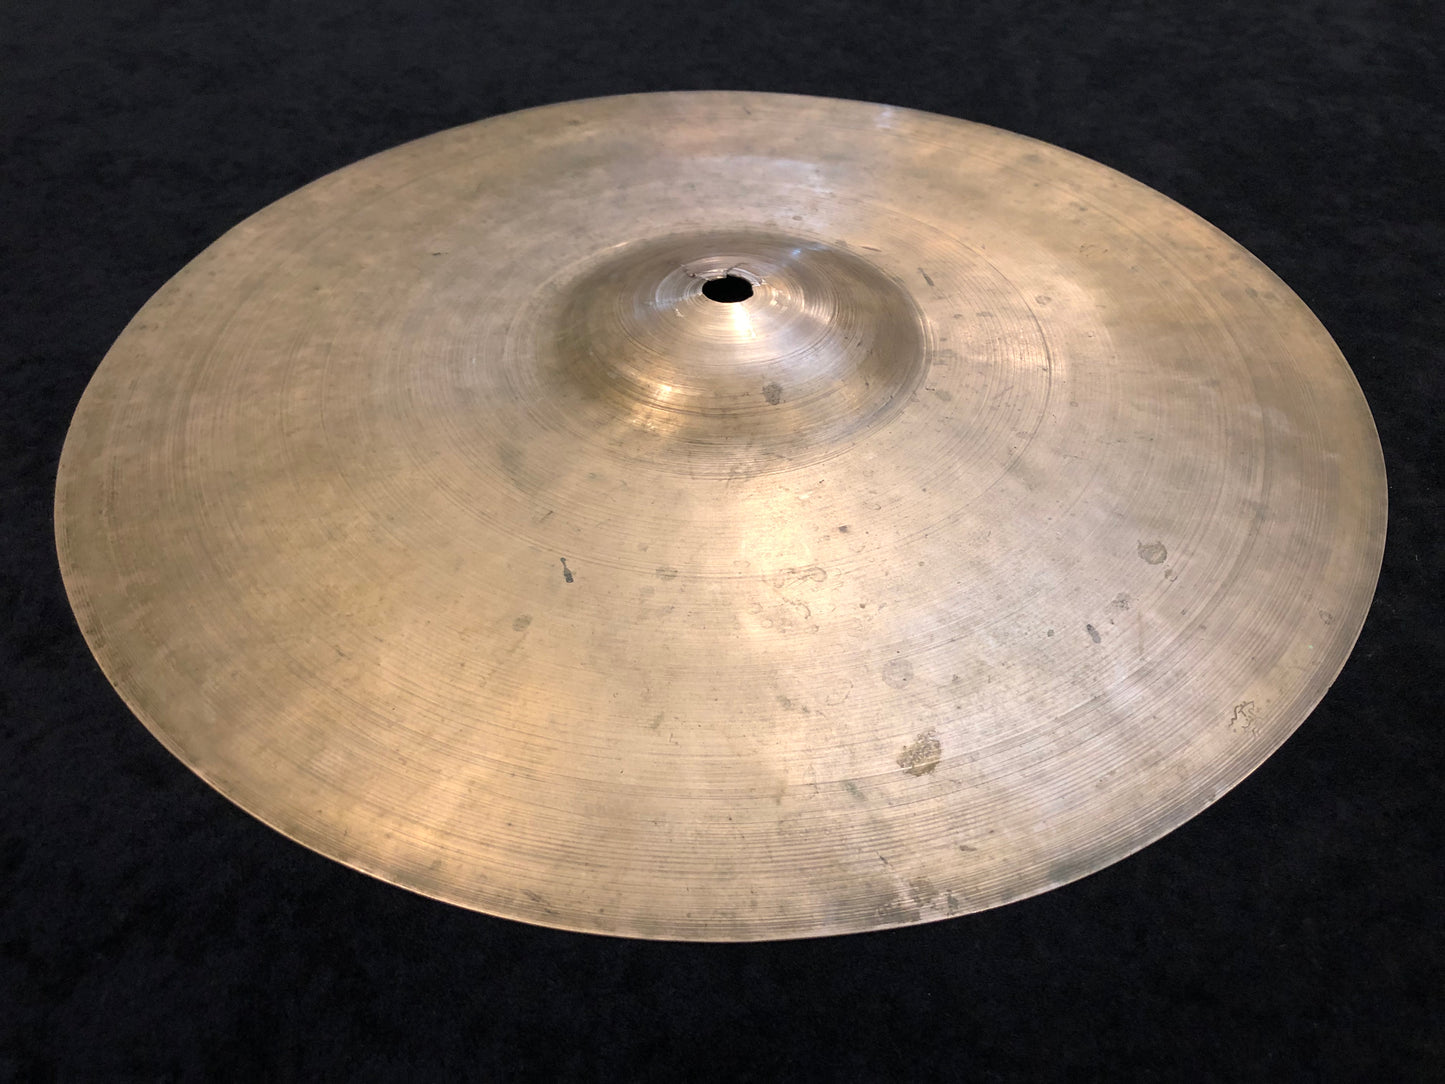 15" K. Zildjian Istanbul 1930s-1945 Old Stamp Type I Hi Hat / Small Ride Cymbal 1026g #215